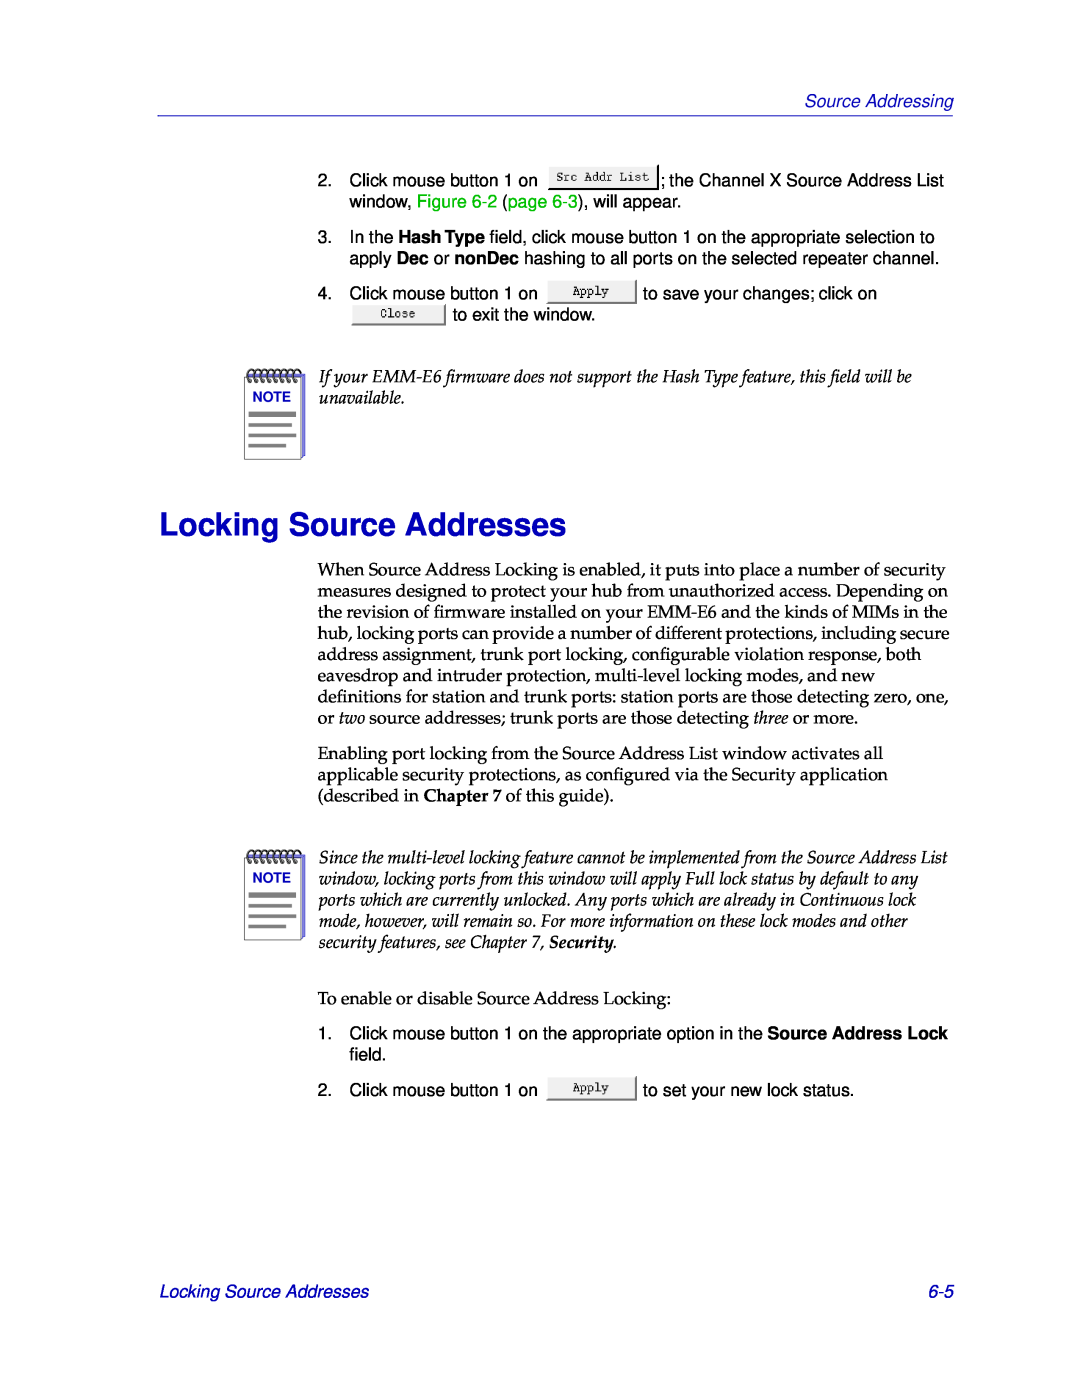 Cabletron Systems EMM-E6 manual Locking Source Addresses, Source Addressing 